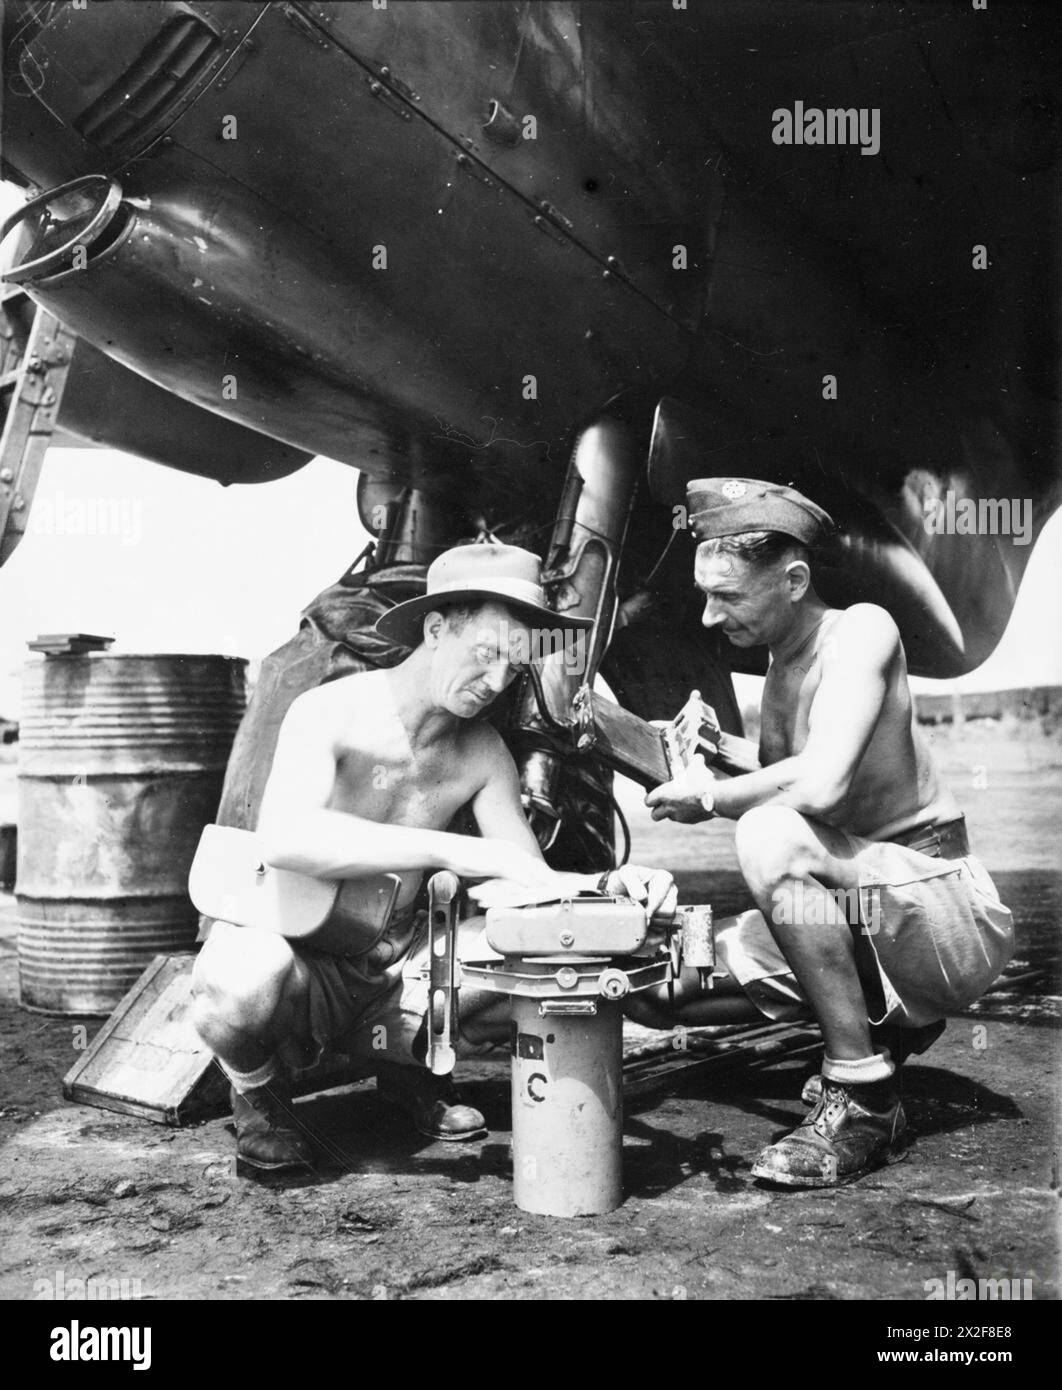 ROYAL AIR FORCE OPERATIONS IN THE FAR EAST, 1941-1945. - Aircraftman I. Harris of Gorton, Manchester and Leading Aircraftman I. Harris of Leeds cleaning the register glass of a Type F.24 aerial camera before installing it in a De Havilland Mosquito photo-reconnaissance aircraft of No. 684 Squadron RAF at Alipore, India Royal Air Force, Royal Air Force Regiment, Sqdn, 105 Stock Photo